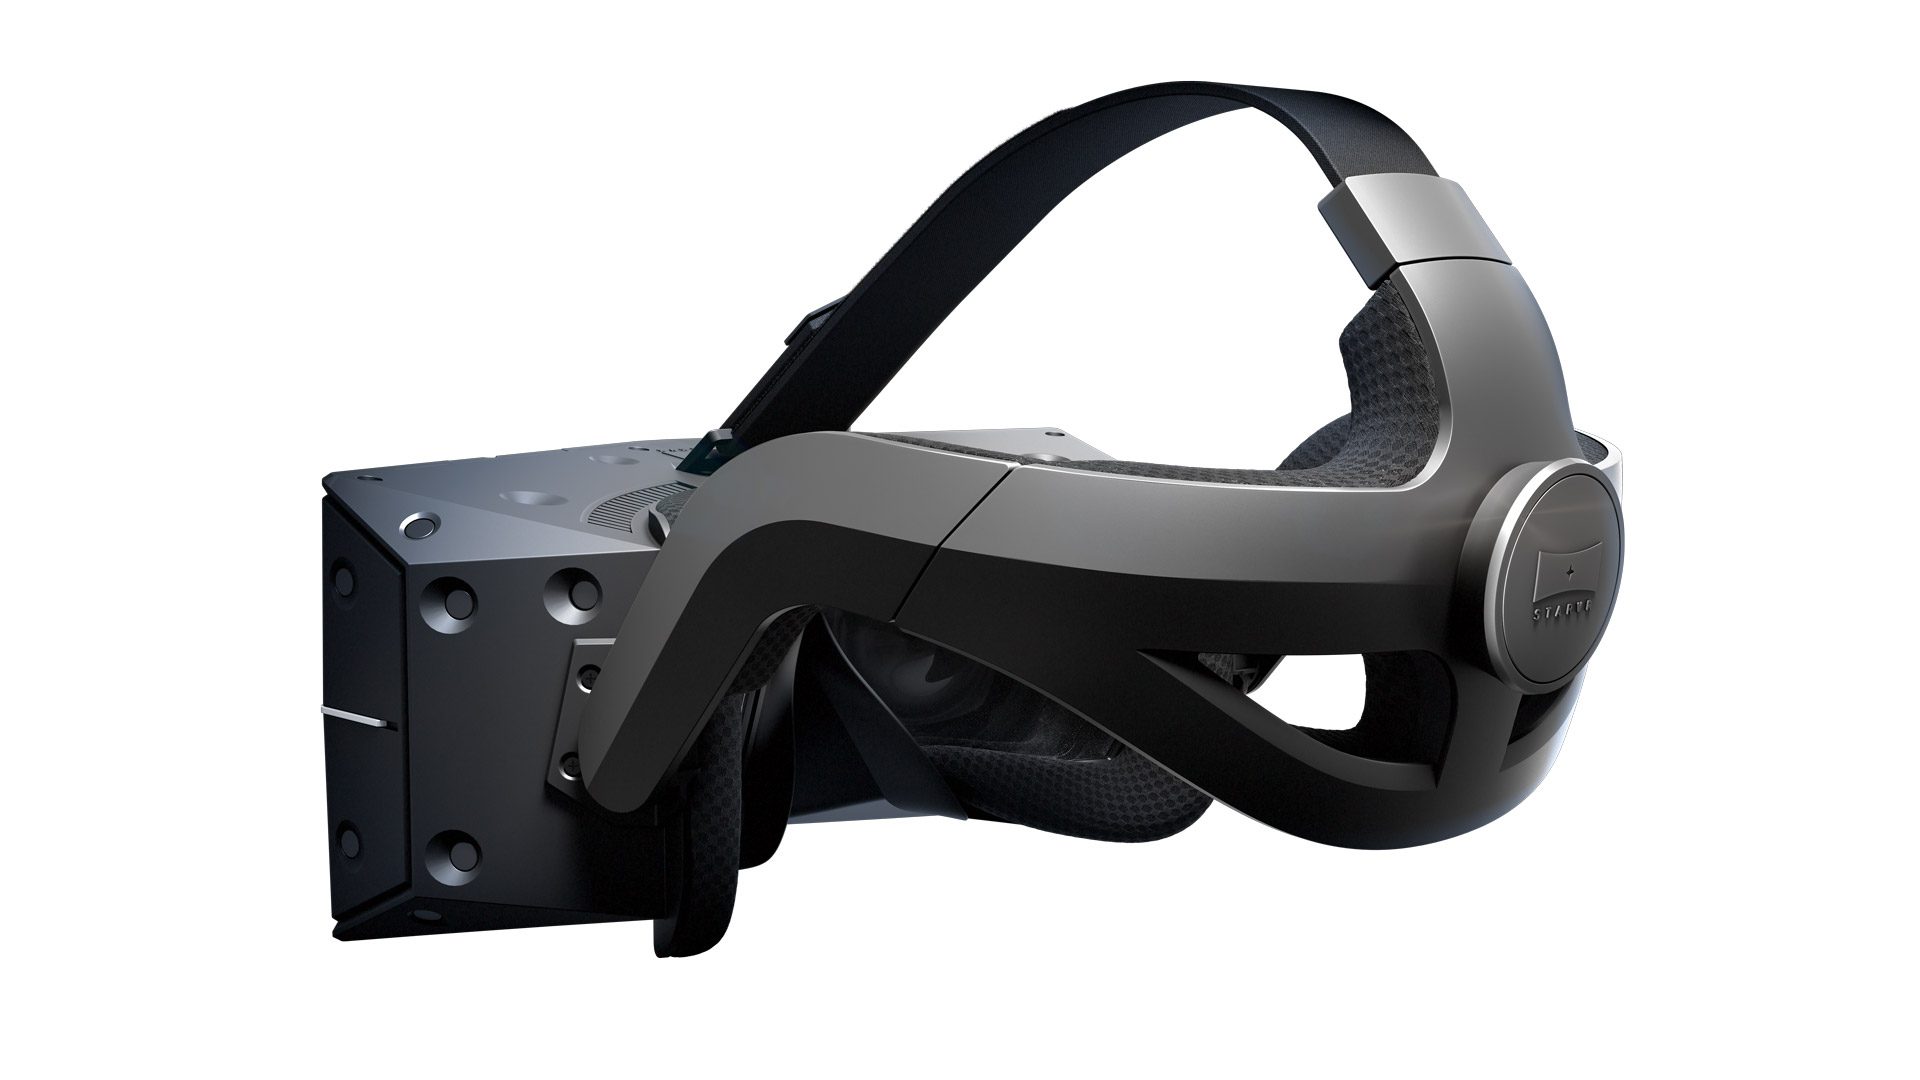 StarVR One Headset Revealed with SteamVR Tracking 2.0, Eye-tracking ...